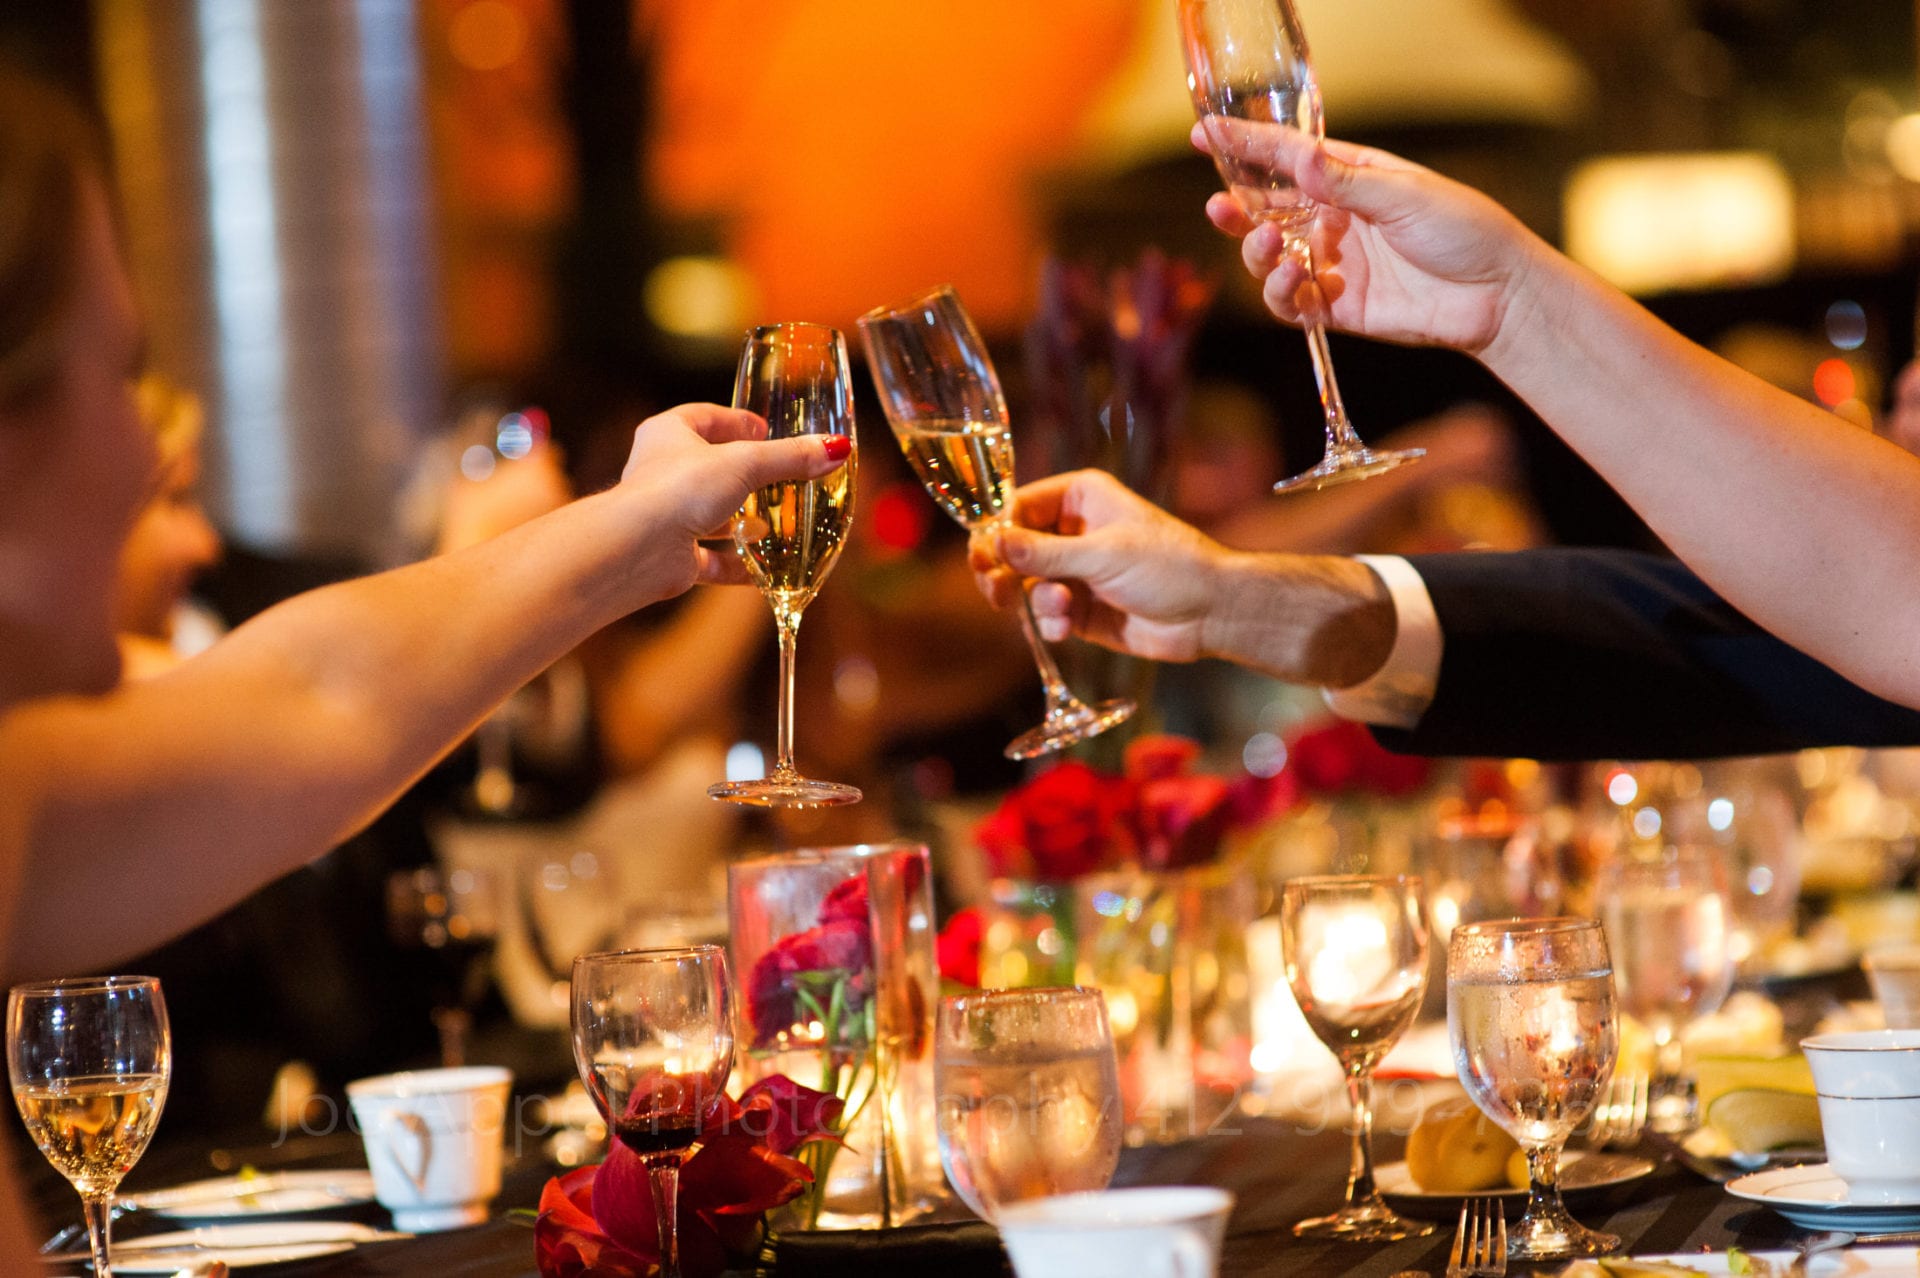 Hands reach out and clink champagne glasses above candle lit tables with red rose centerpieces.